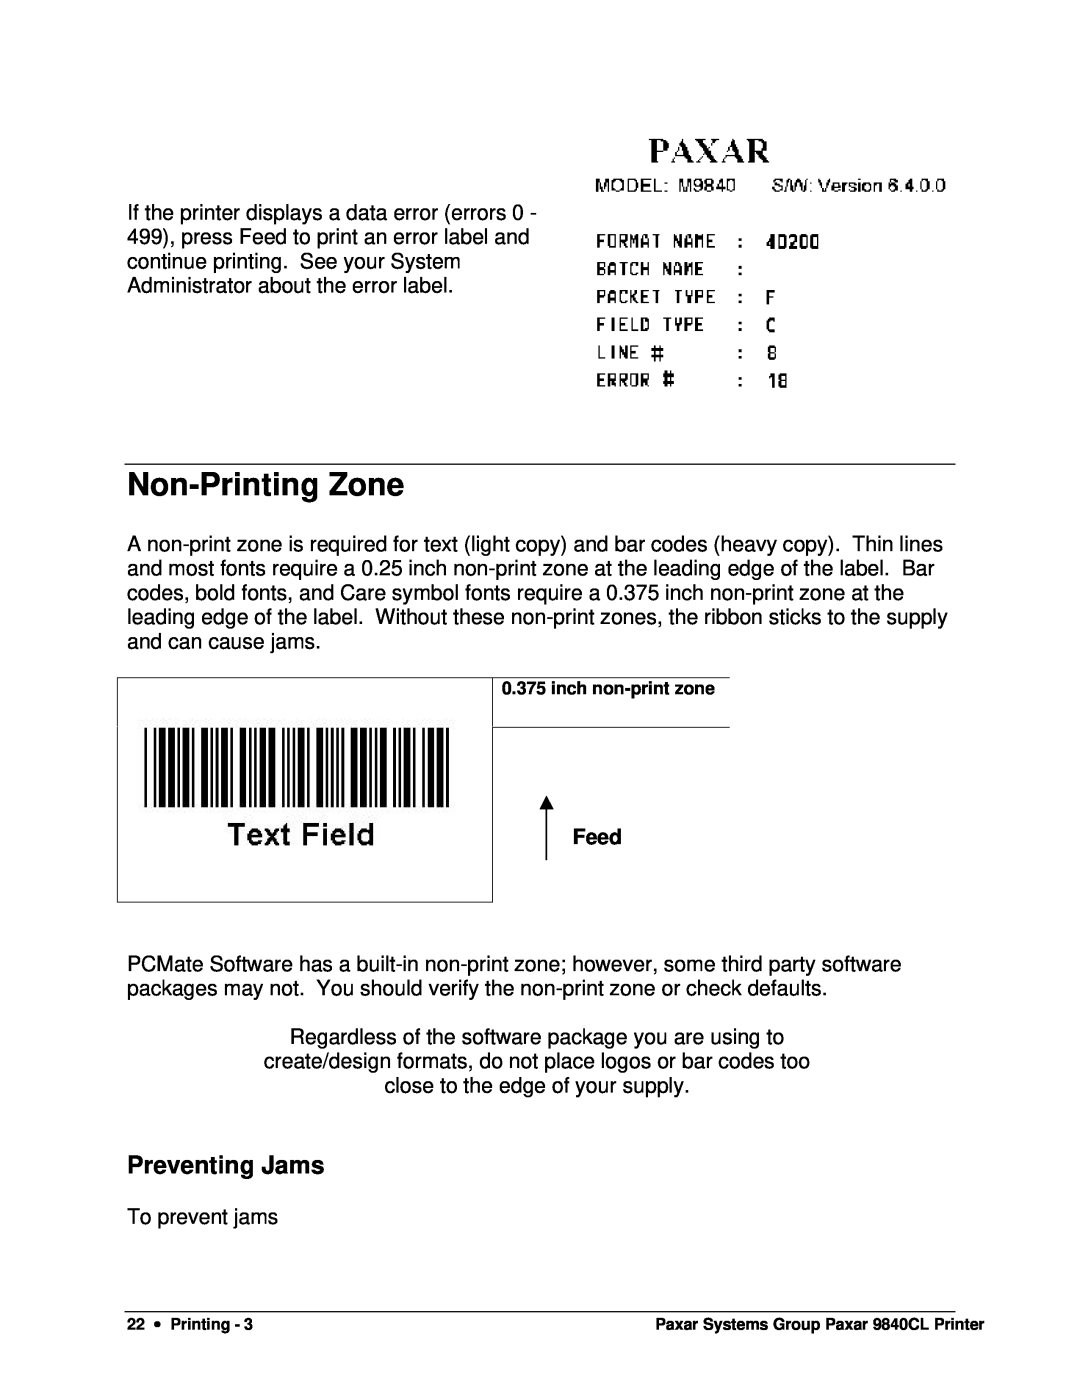 Paxar 9840CL user manual Non-Printing Zone, Preventing Jams, Feed 